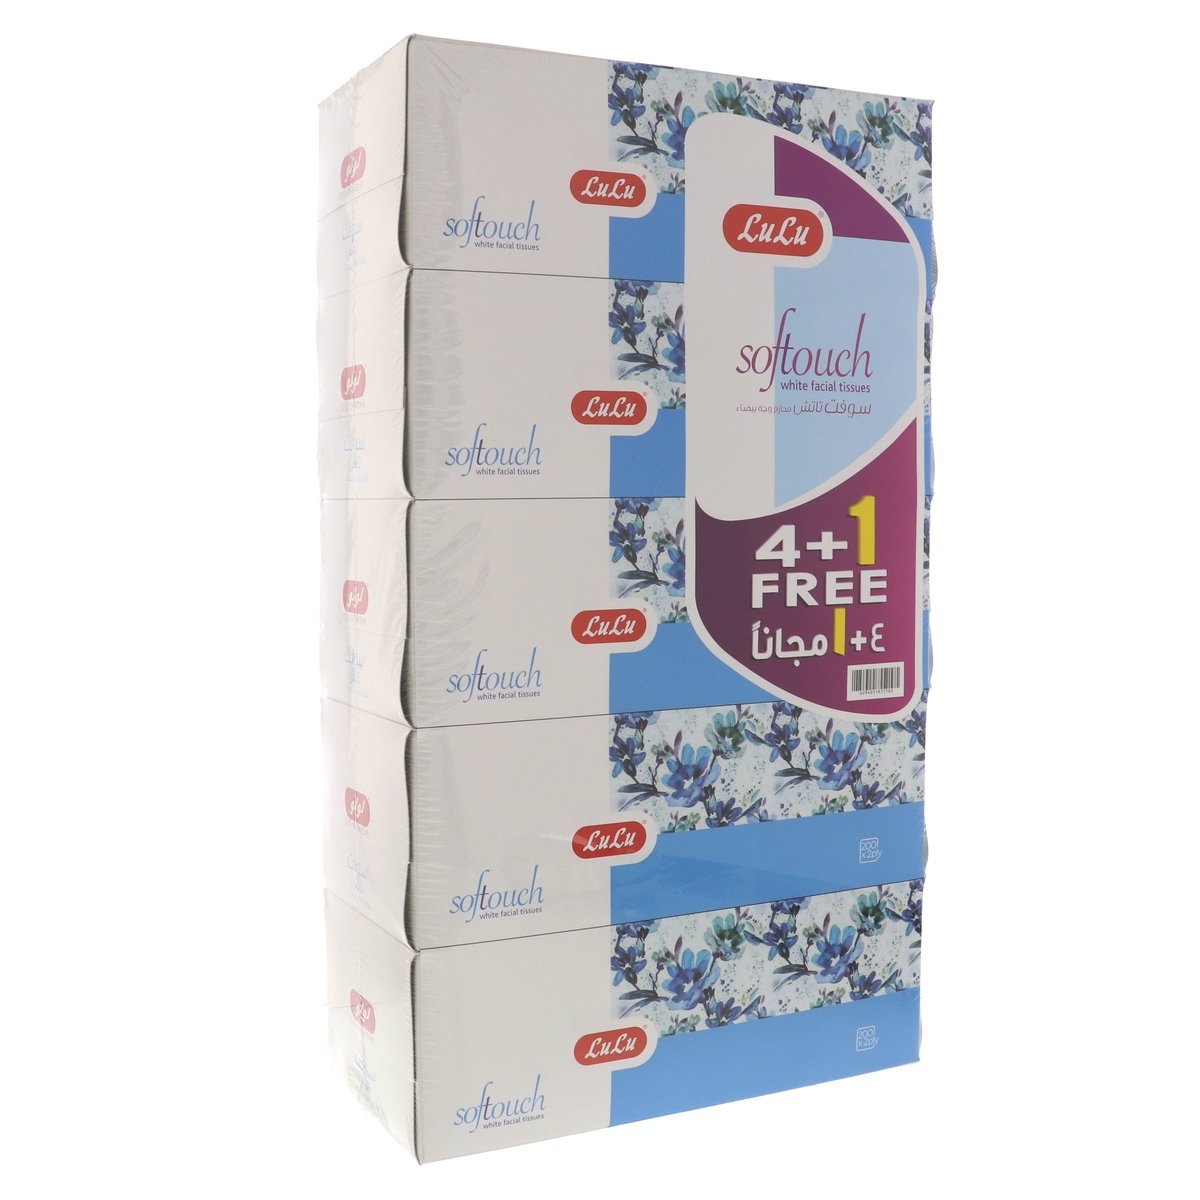 LuLu PL LuLu Softouch White Facial Tissue 2ply 5 x 200 Sheets